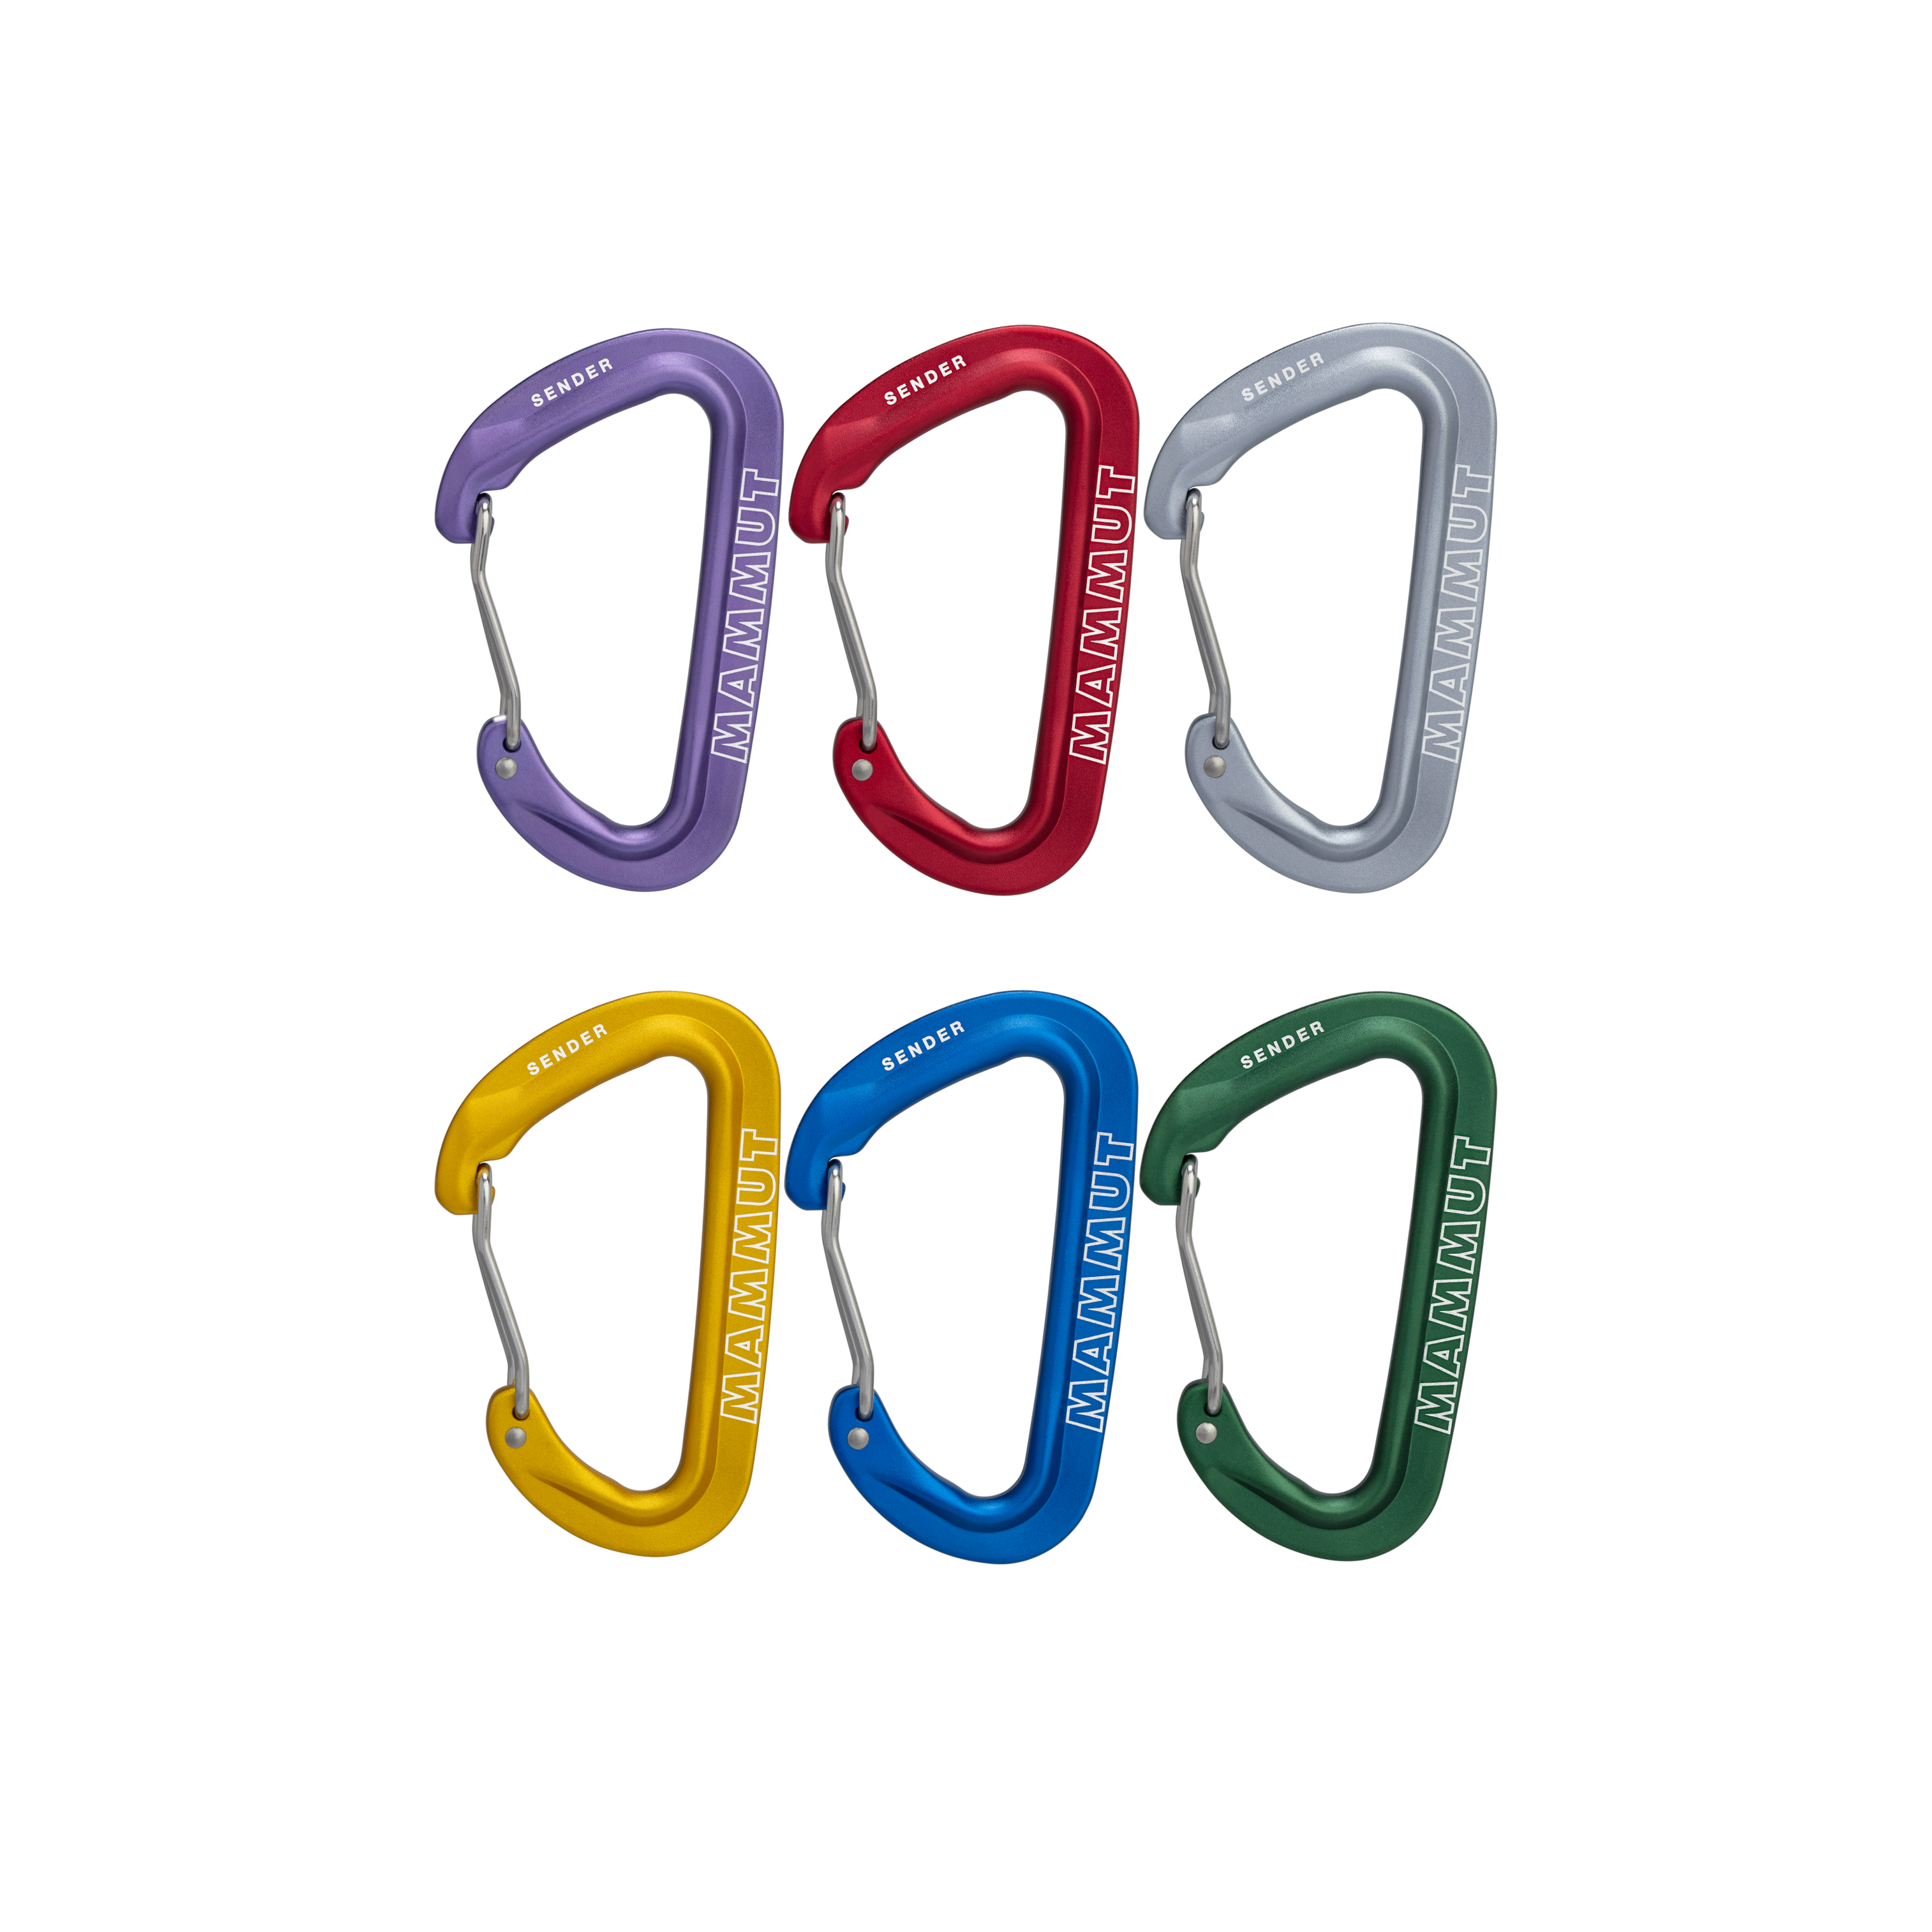 Mammut Carabiner in all colors